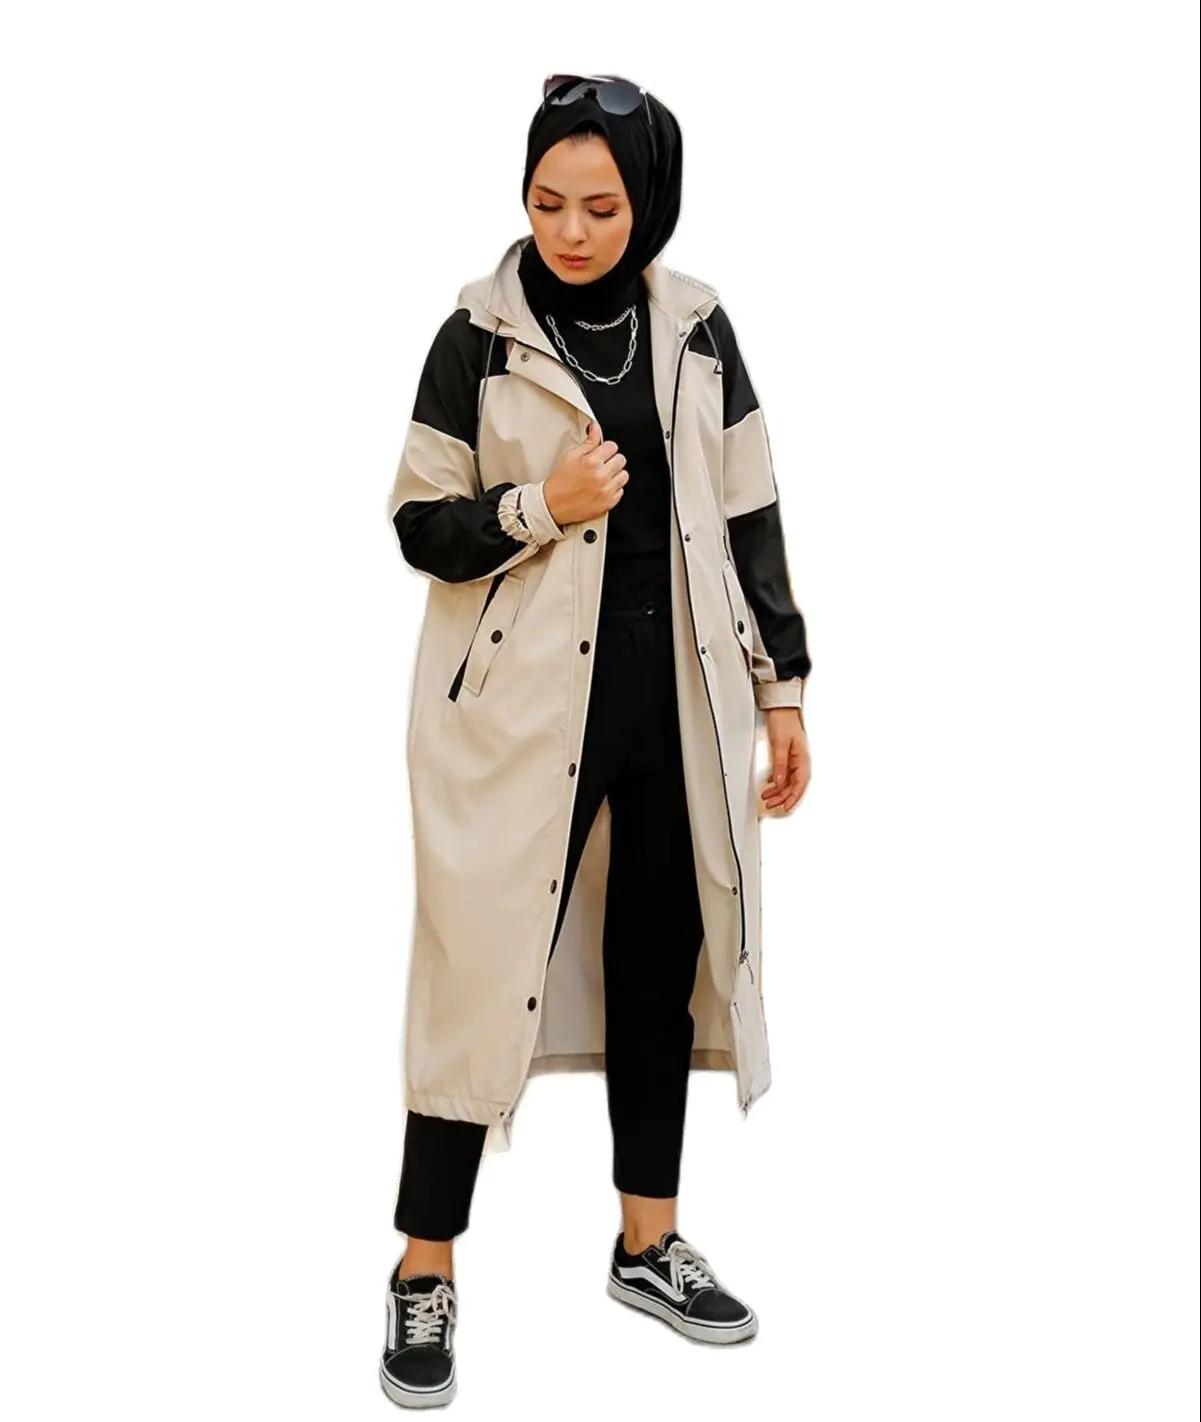 Autumn Trench Coat New Fashion Loose Large Size X-Long Women 'S Trench Coat Muslim Clothing Hooded Zipper Button Muslim Fashion